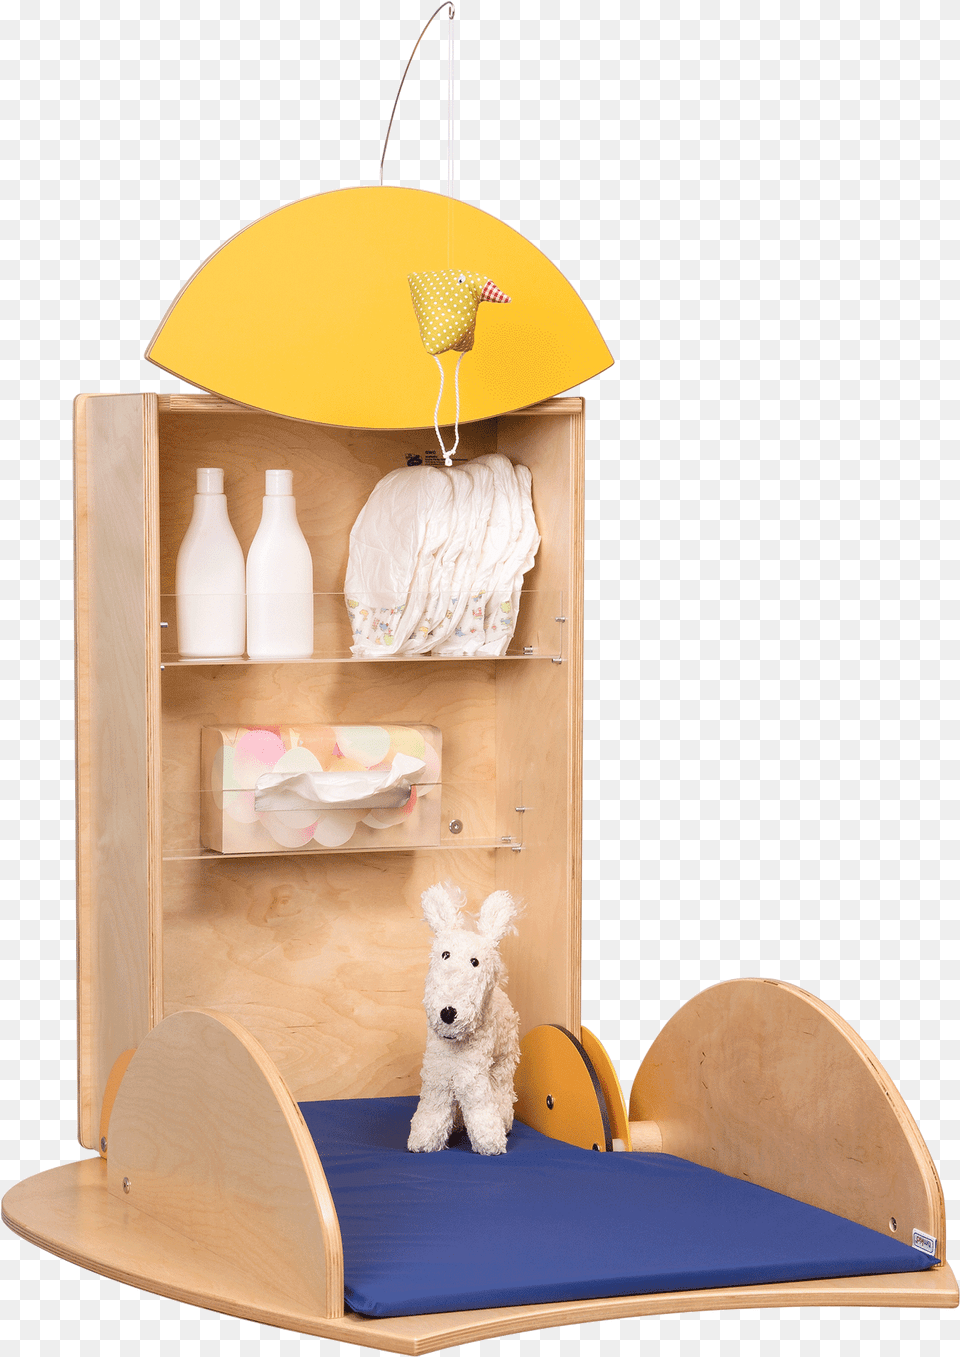 Owo Birch Top Yellow Changing Table, Furniture, Wood, Plywood, Cabinet Free Png